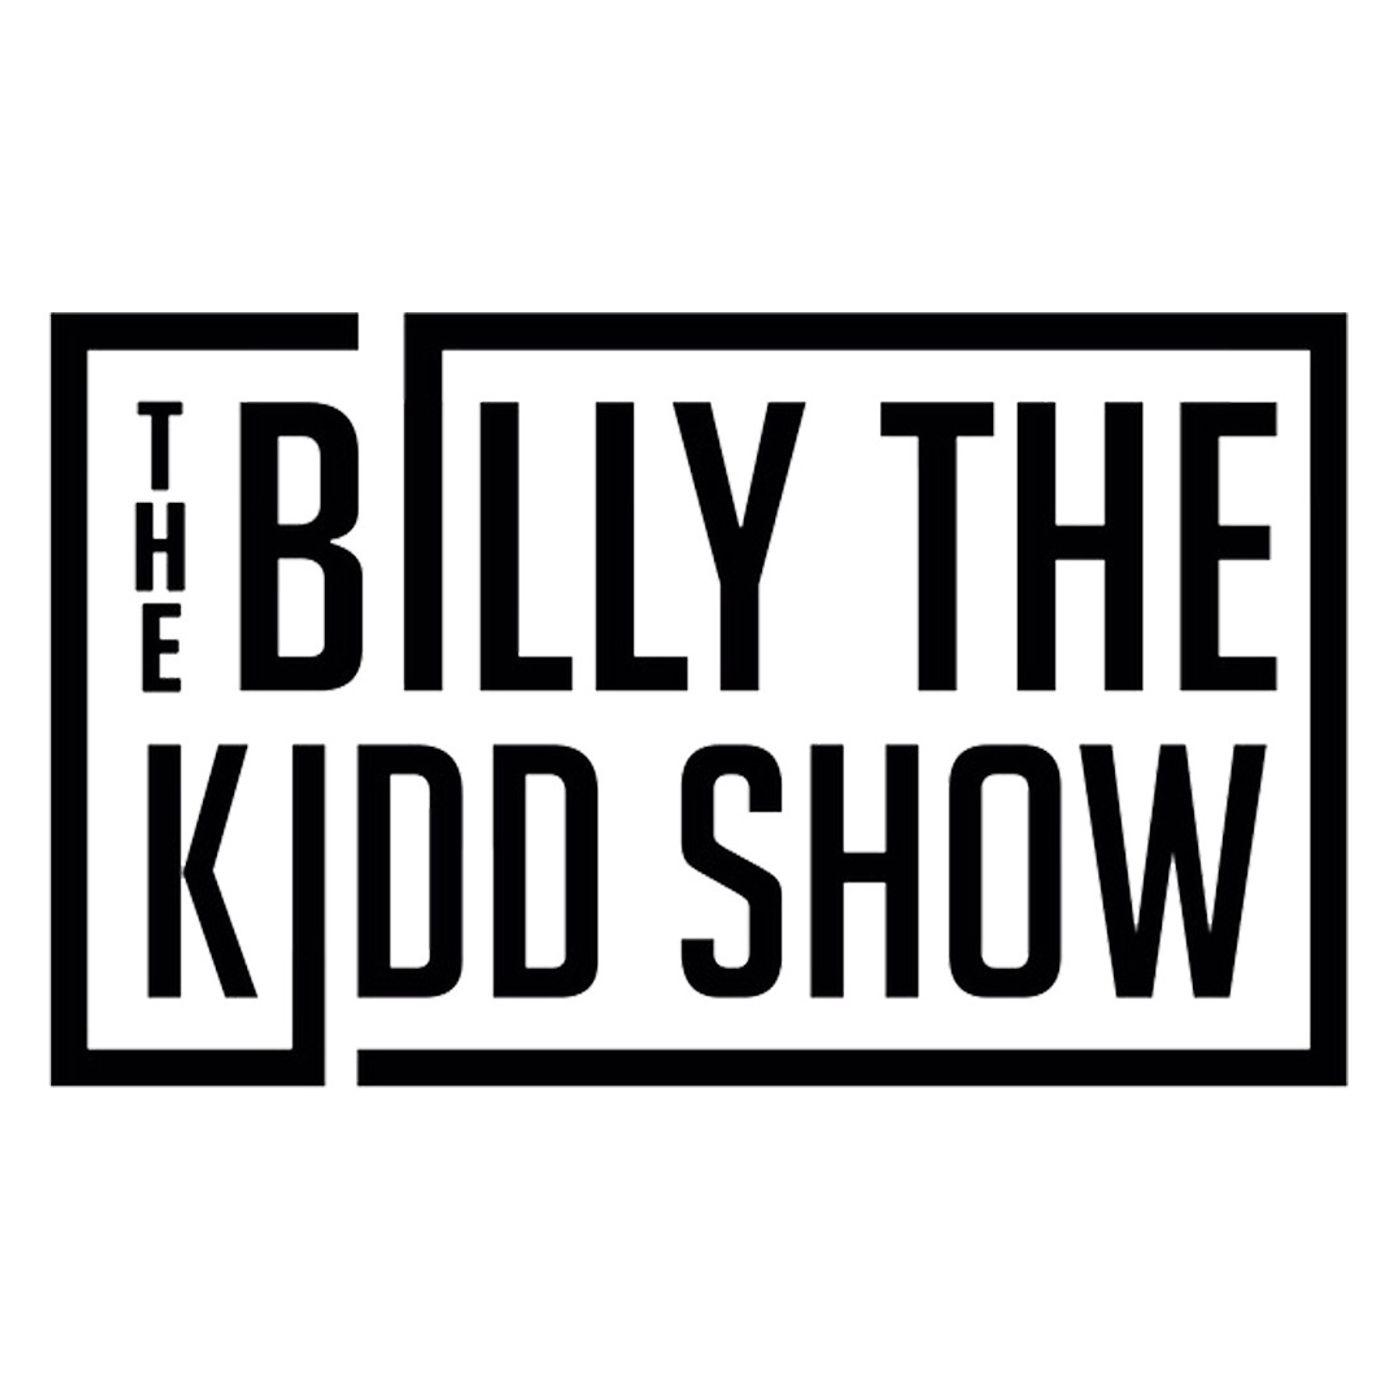 Check Out The BillyThe Kidd Show Everyday From 6-10!